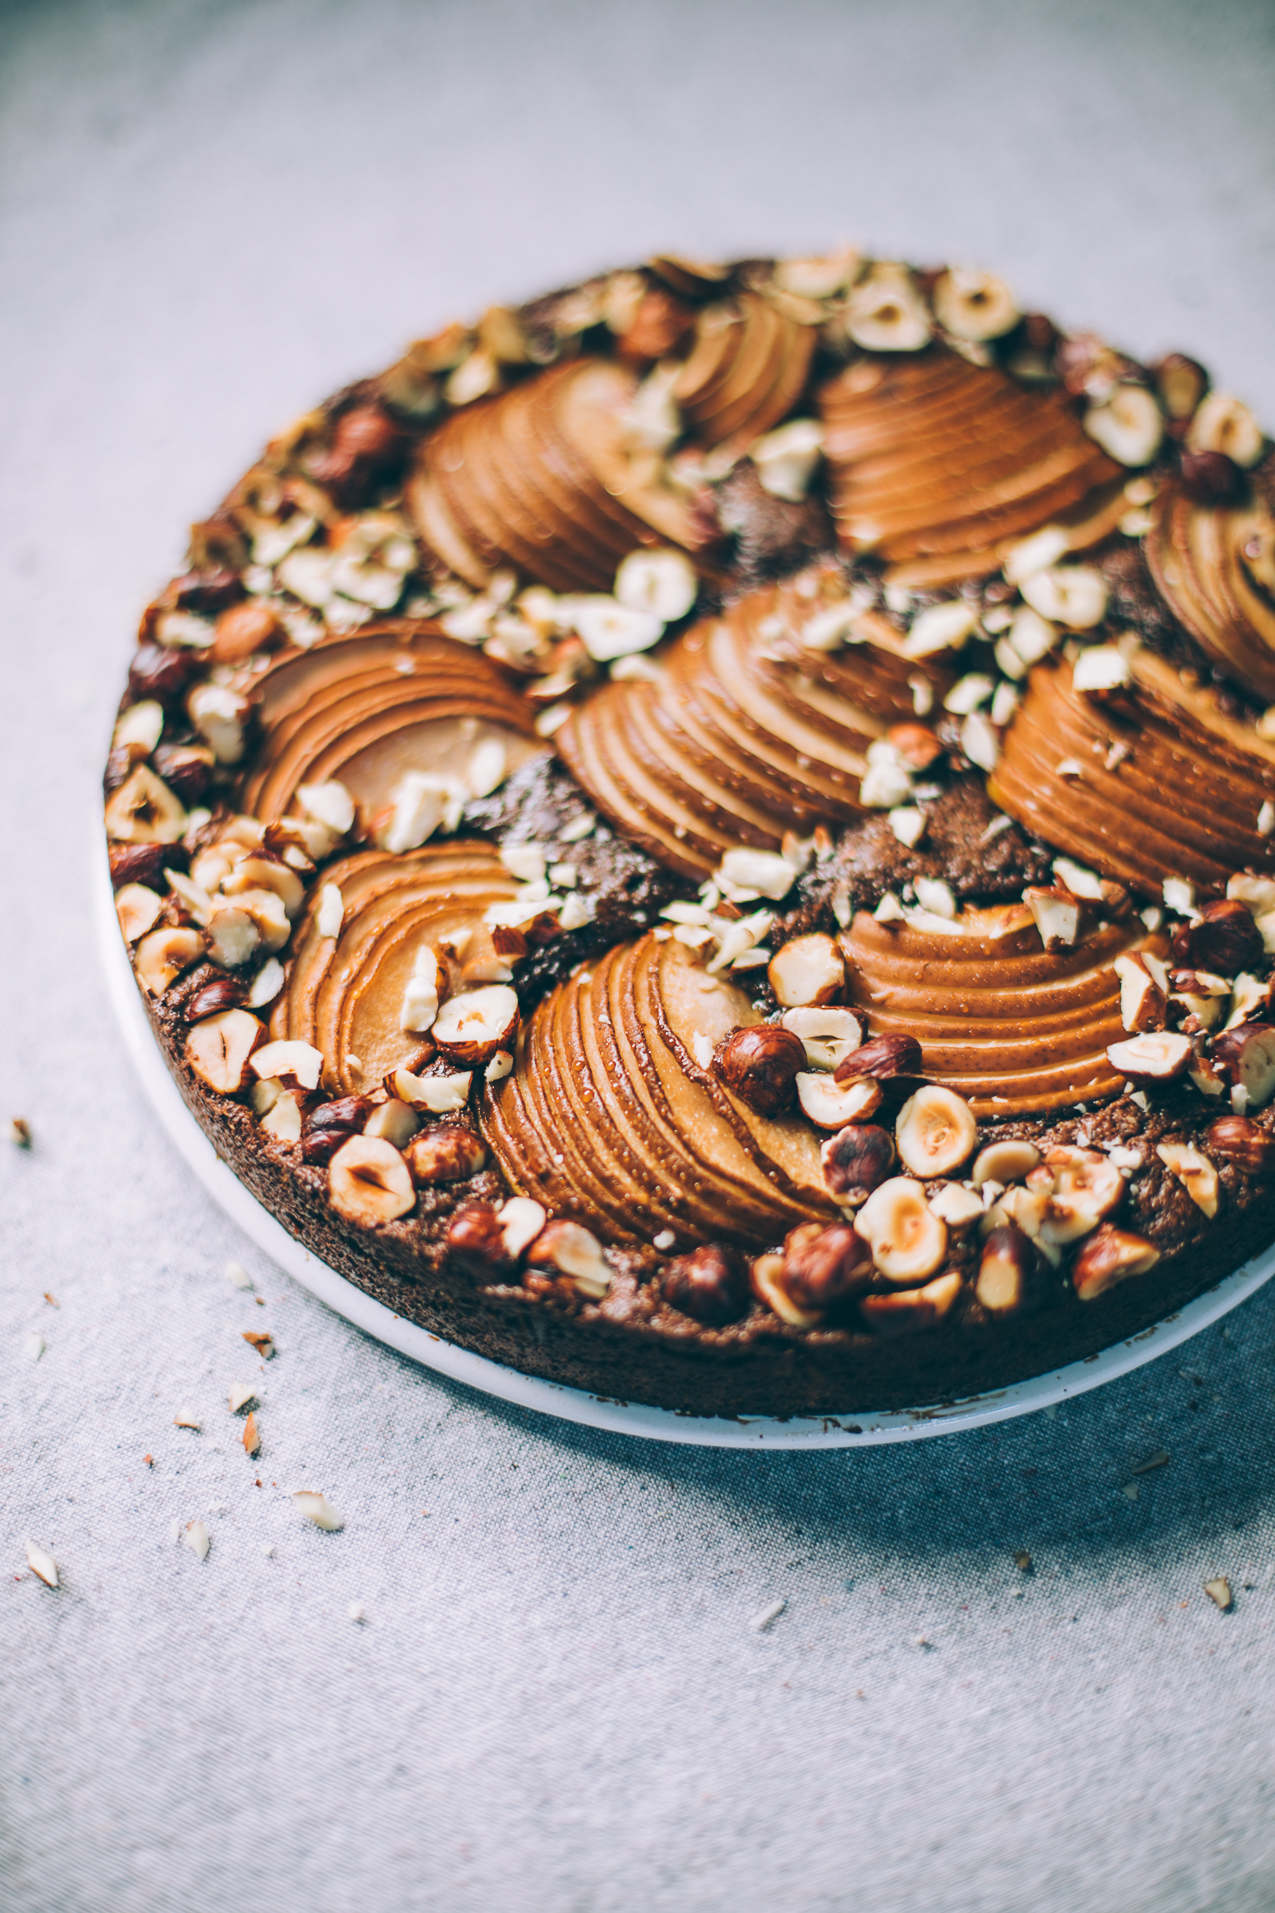 Flourless Chocolate Olive Oil Cake with Cardamom, Pears and Hazelnuts — Will Frolic for Food